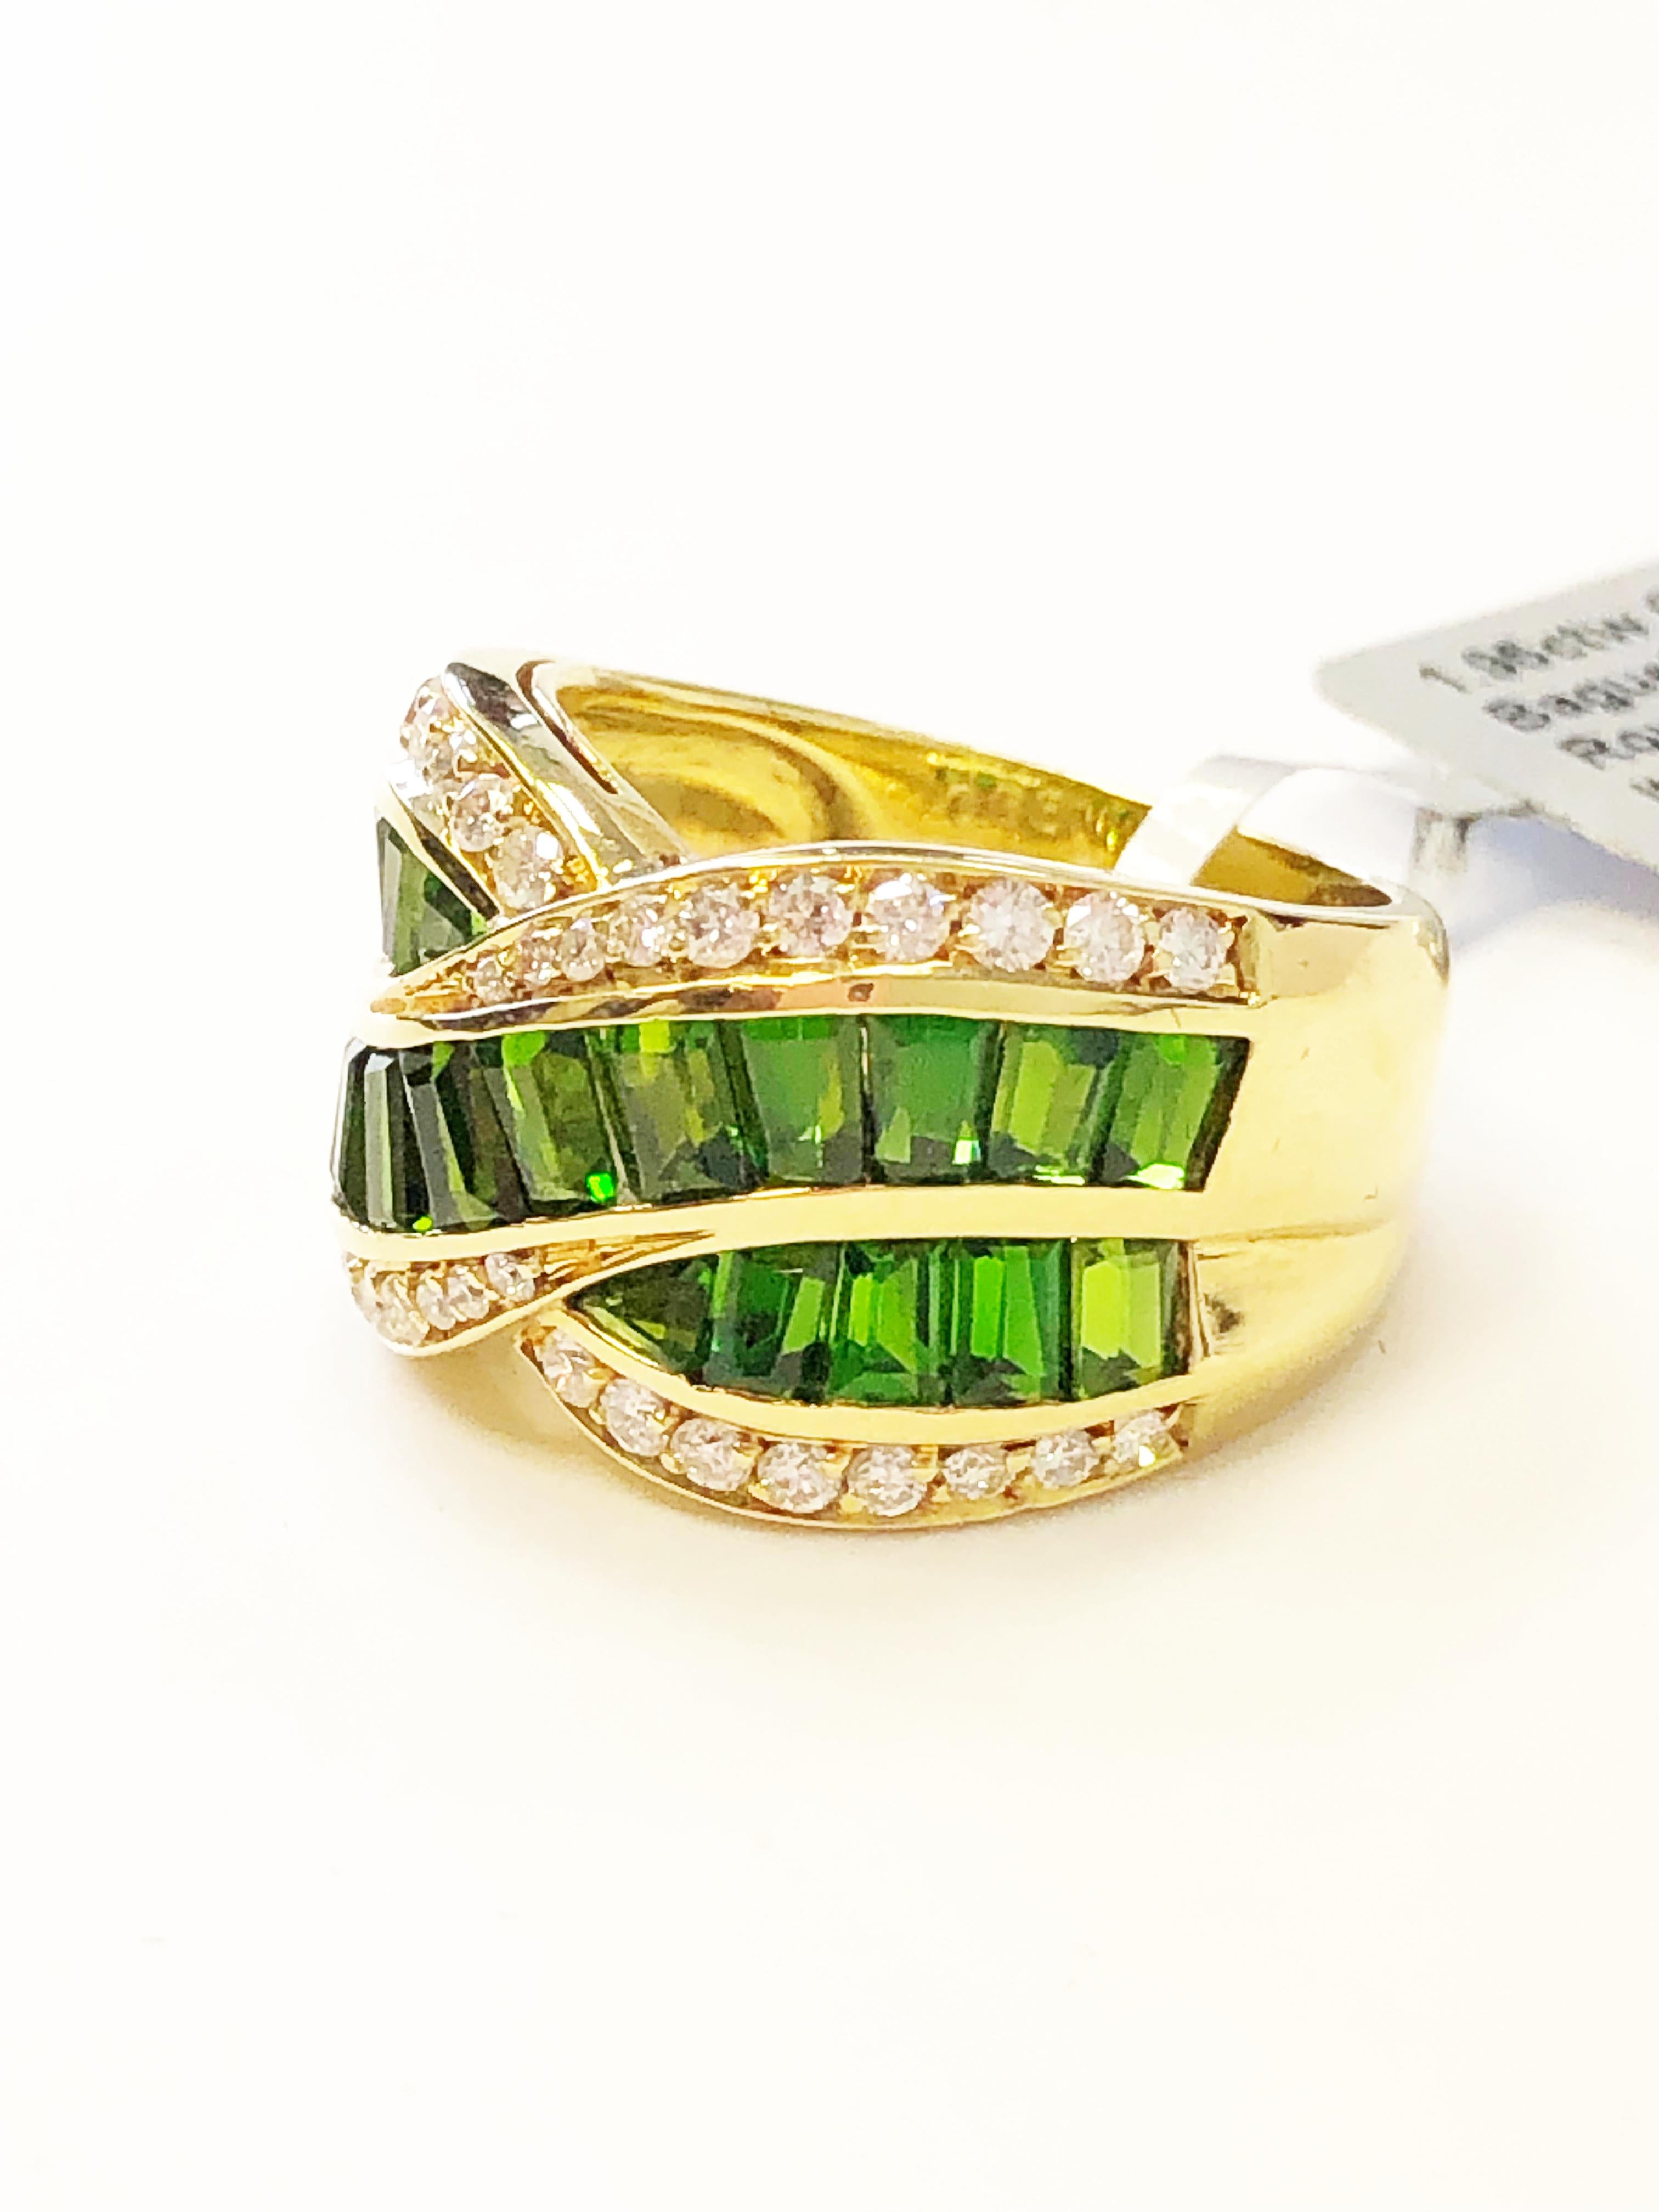 Beautiful green tourmaline baguettes weighing 1.95 carats with 0.66 carats of white diamond rounds in a handmade 18k yellow gold mounting.  The green tourmalines have a rich and bright green tone and the diamonds are good quality and white.  The